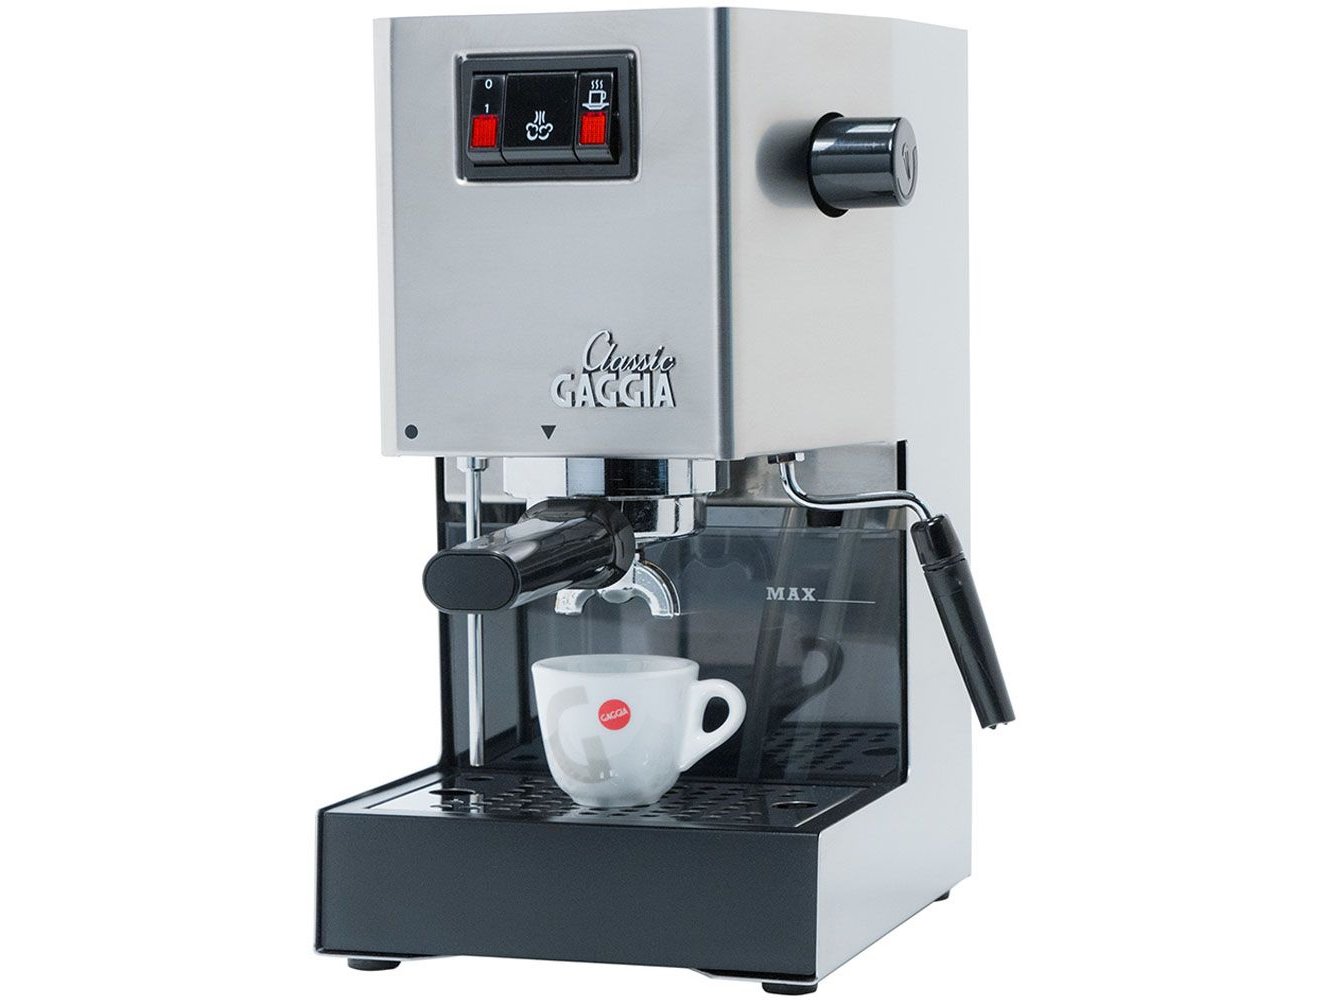 GAGGIA ガジア セミオートエスプレッソマシン Classic クラシック<img class='new_mark_img2' src='https://img.shop-pro.jp/img/new/icons16.gif' style='border:none;display:inline;margin:0px;padding:0px;width:auto;' />